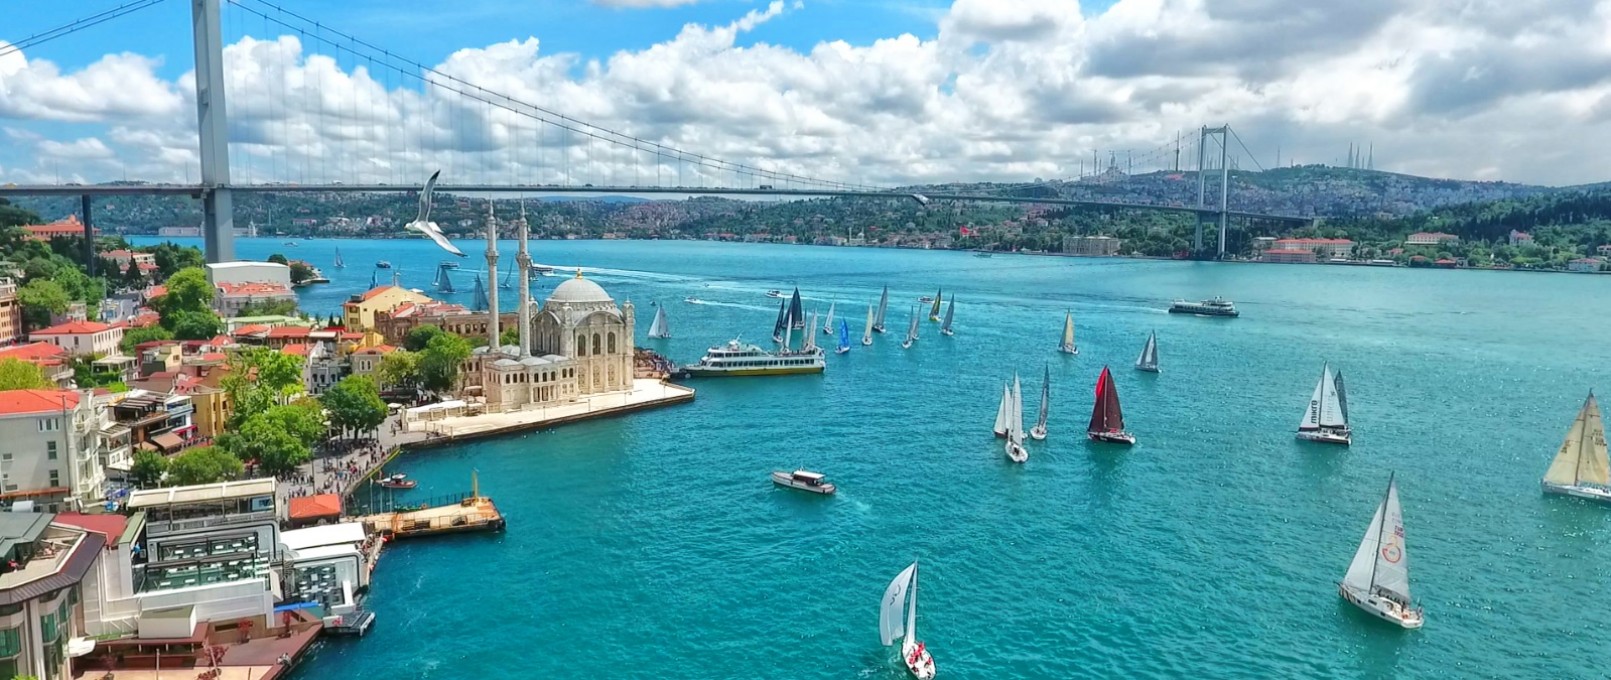 İstanbul <br> Destination for your health